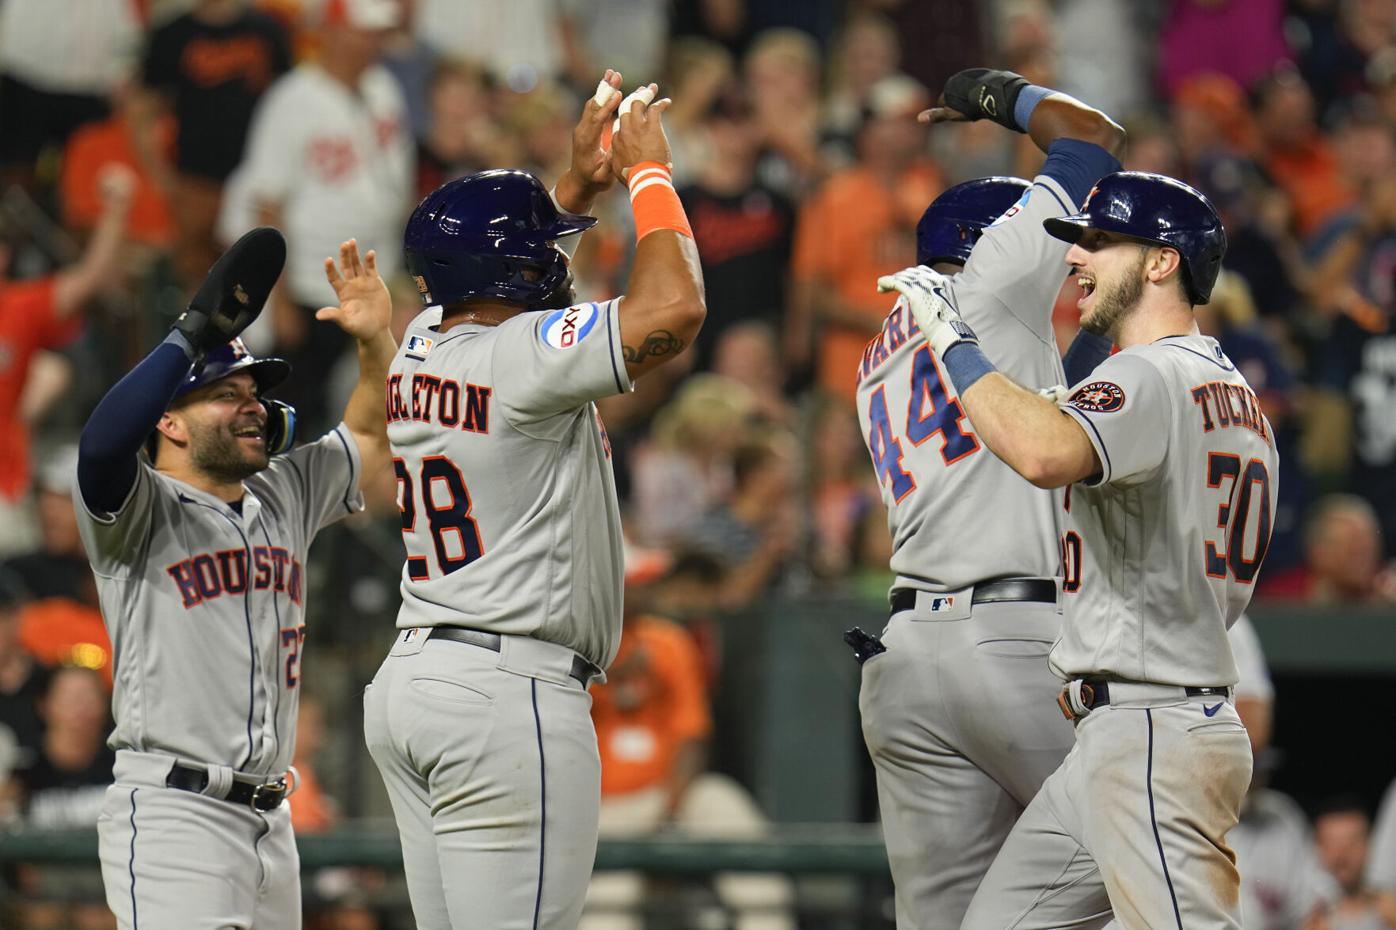 Altuve's homer lifts Astros over Red Sox